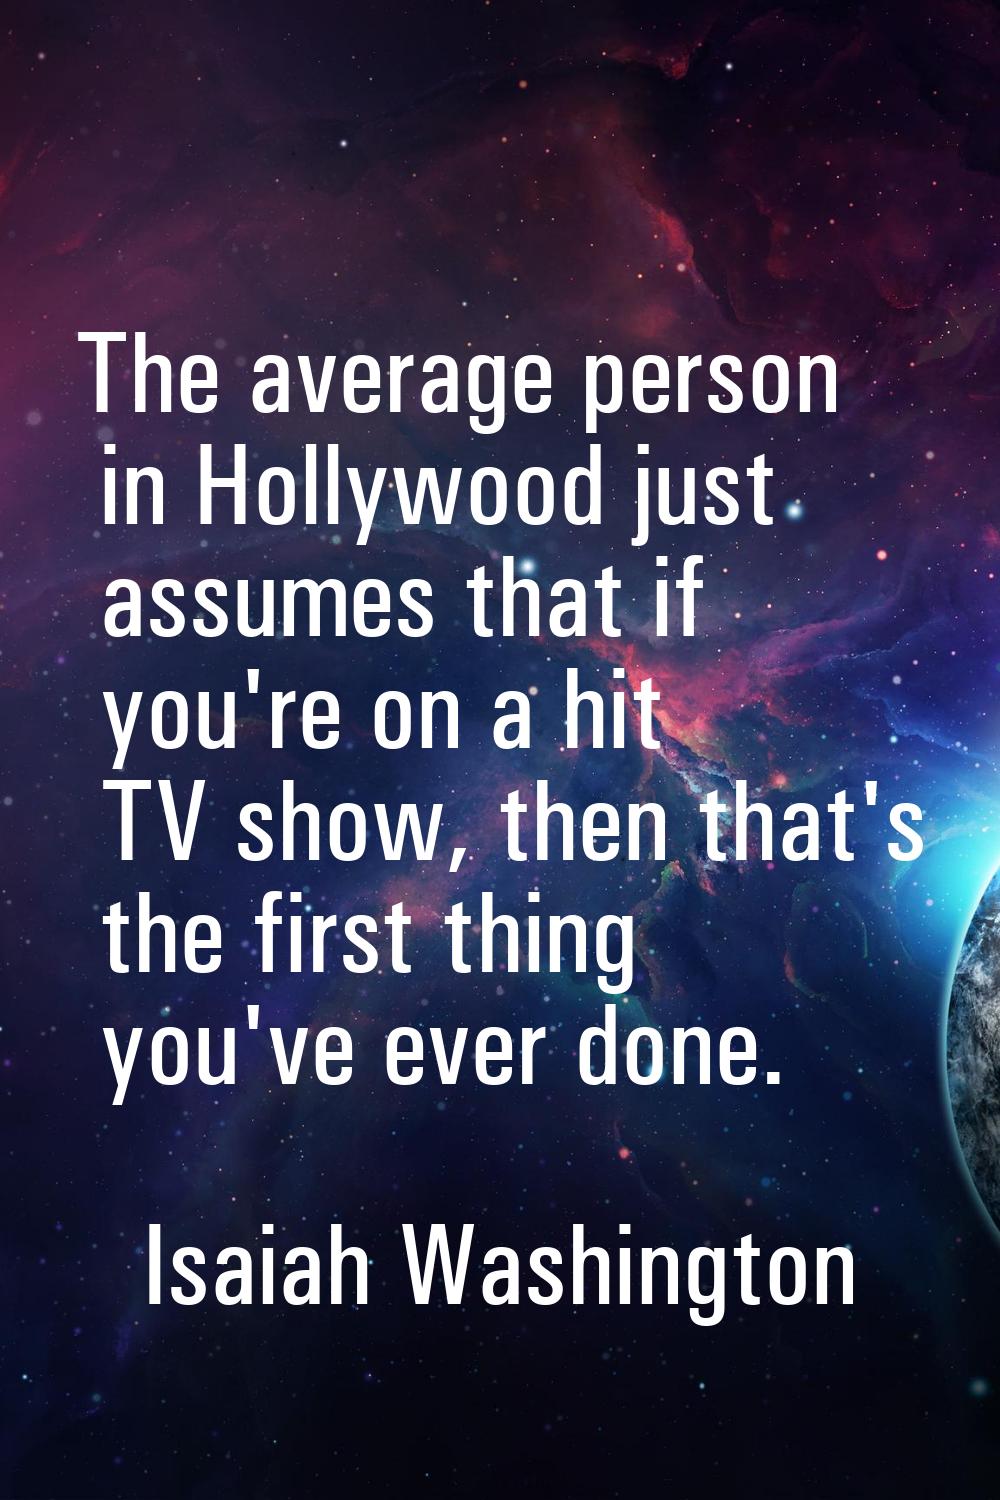 The average person in Hollywood just assumes that if you're on a hit TV show, then that's the first